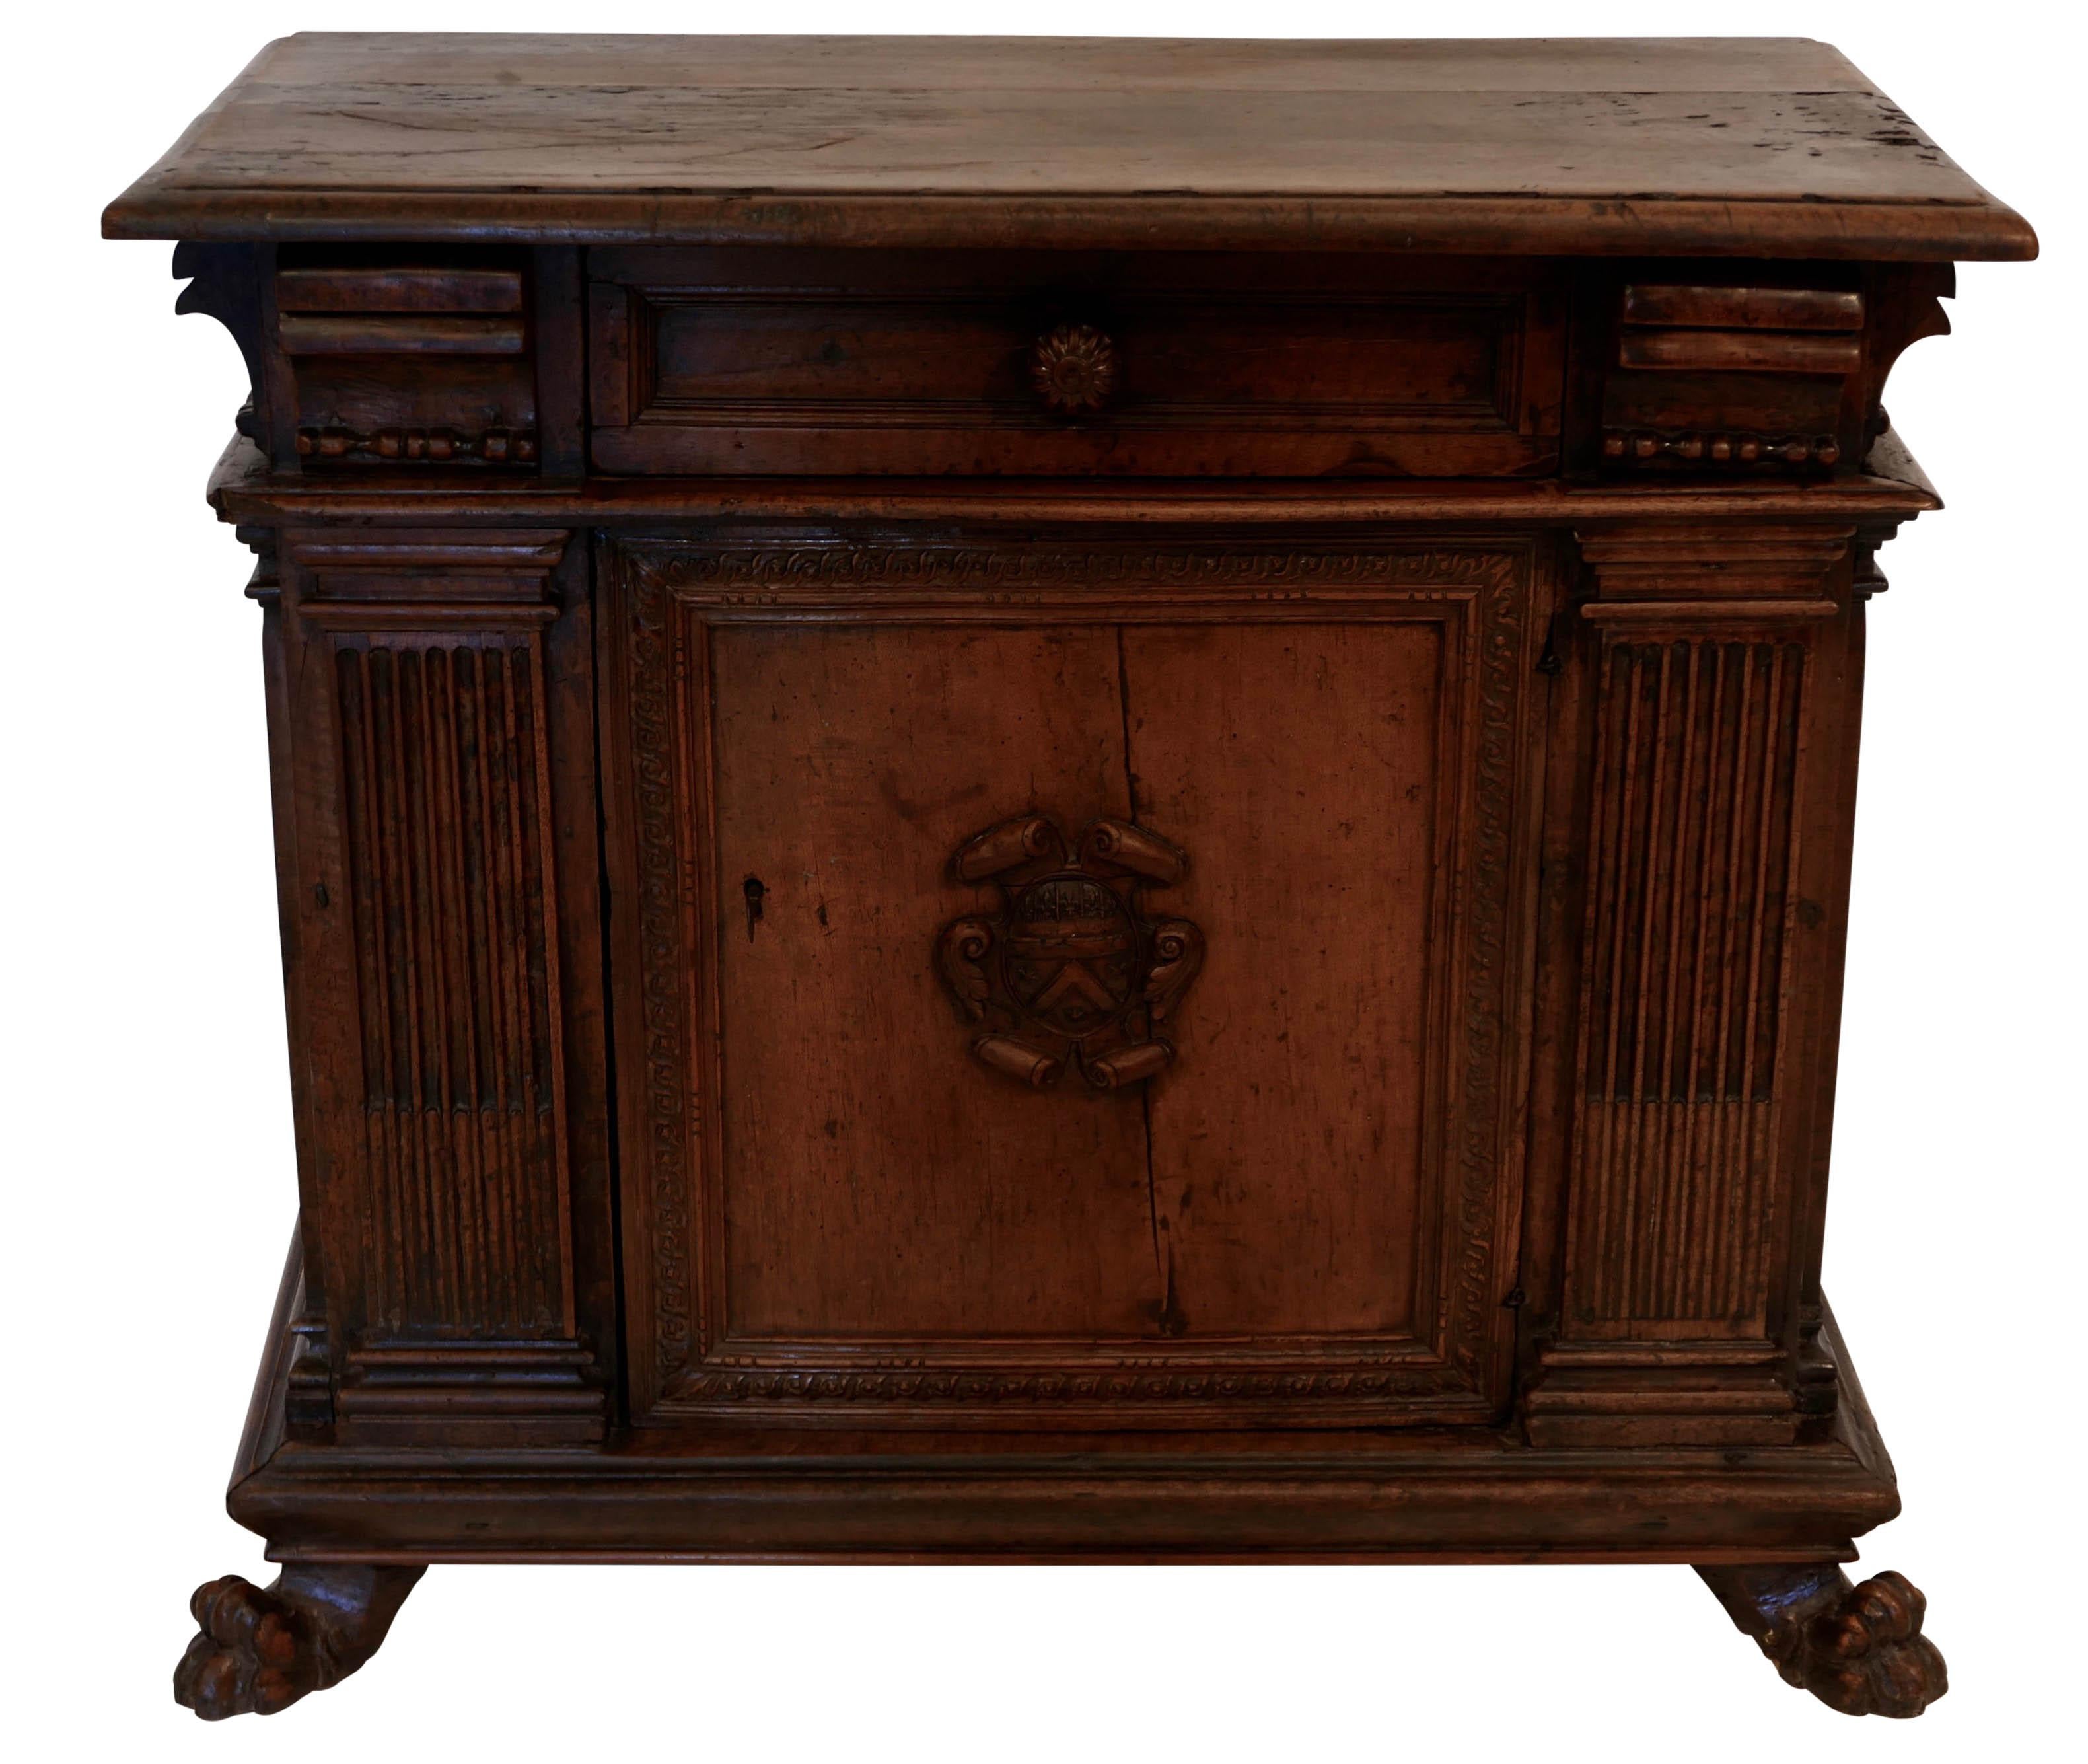 Original walnut cabinet credenza with three drawers above the cabinet with stop fluted pilasters standing on four lion paw feet. The feet on this cabinet maybe older replacements.
The base has recent re-enforcements on the underside. In remarkable